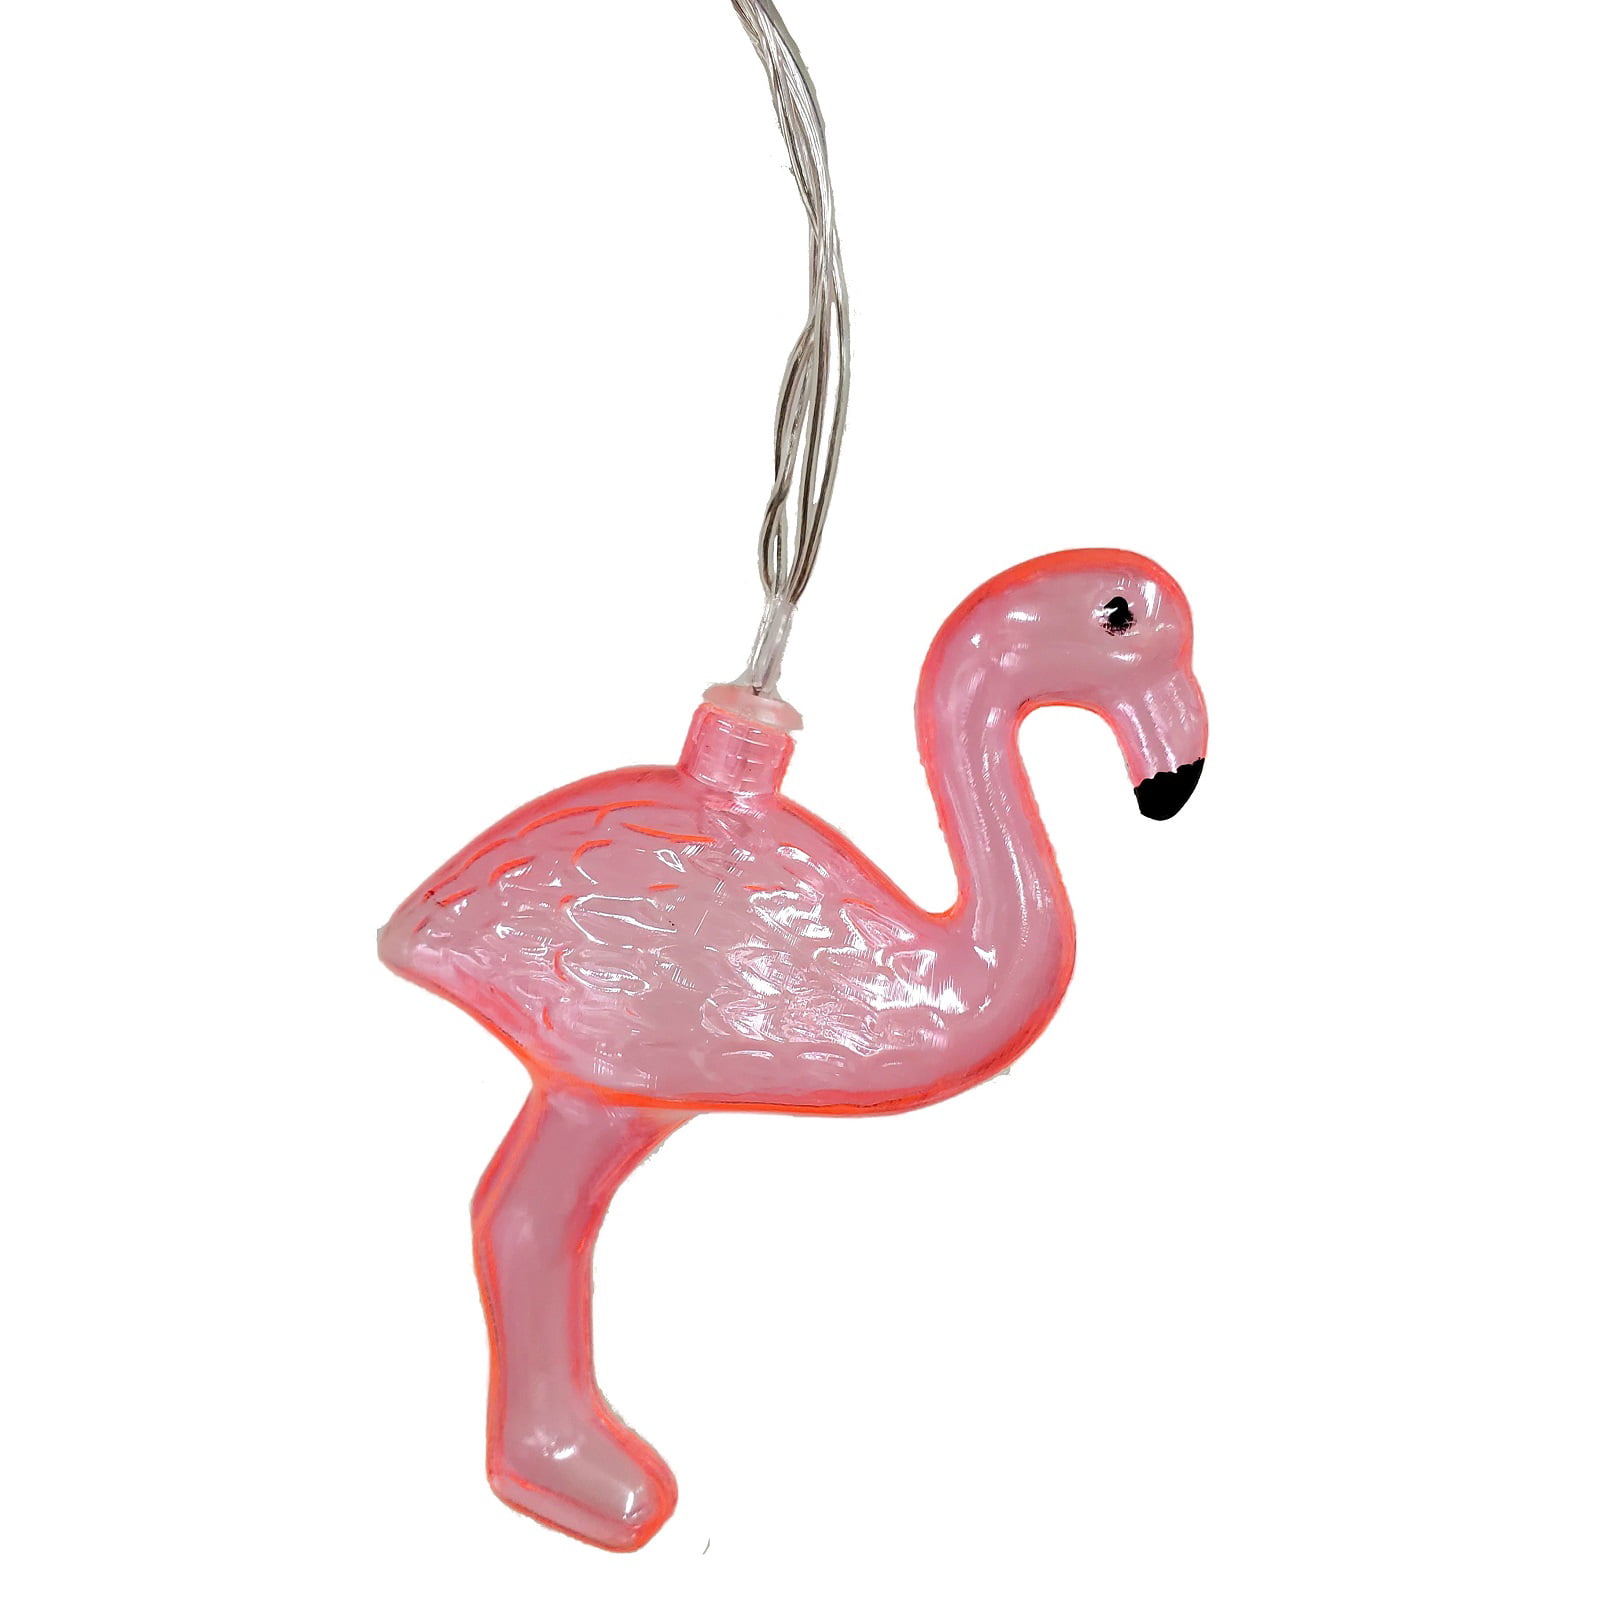 10 LED PINK FLAMINGO FAIRY LIGHT NOVELTY LIGHTS INDOOR STRING PARTY CHAIN DECO 